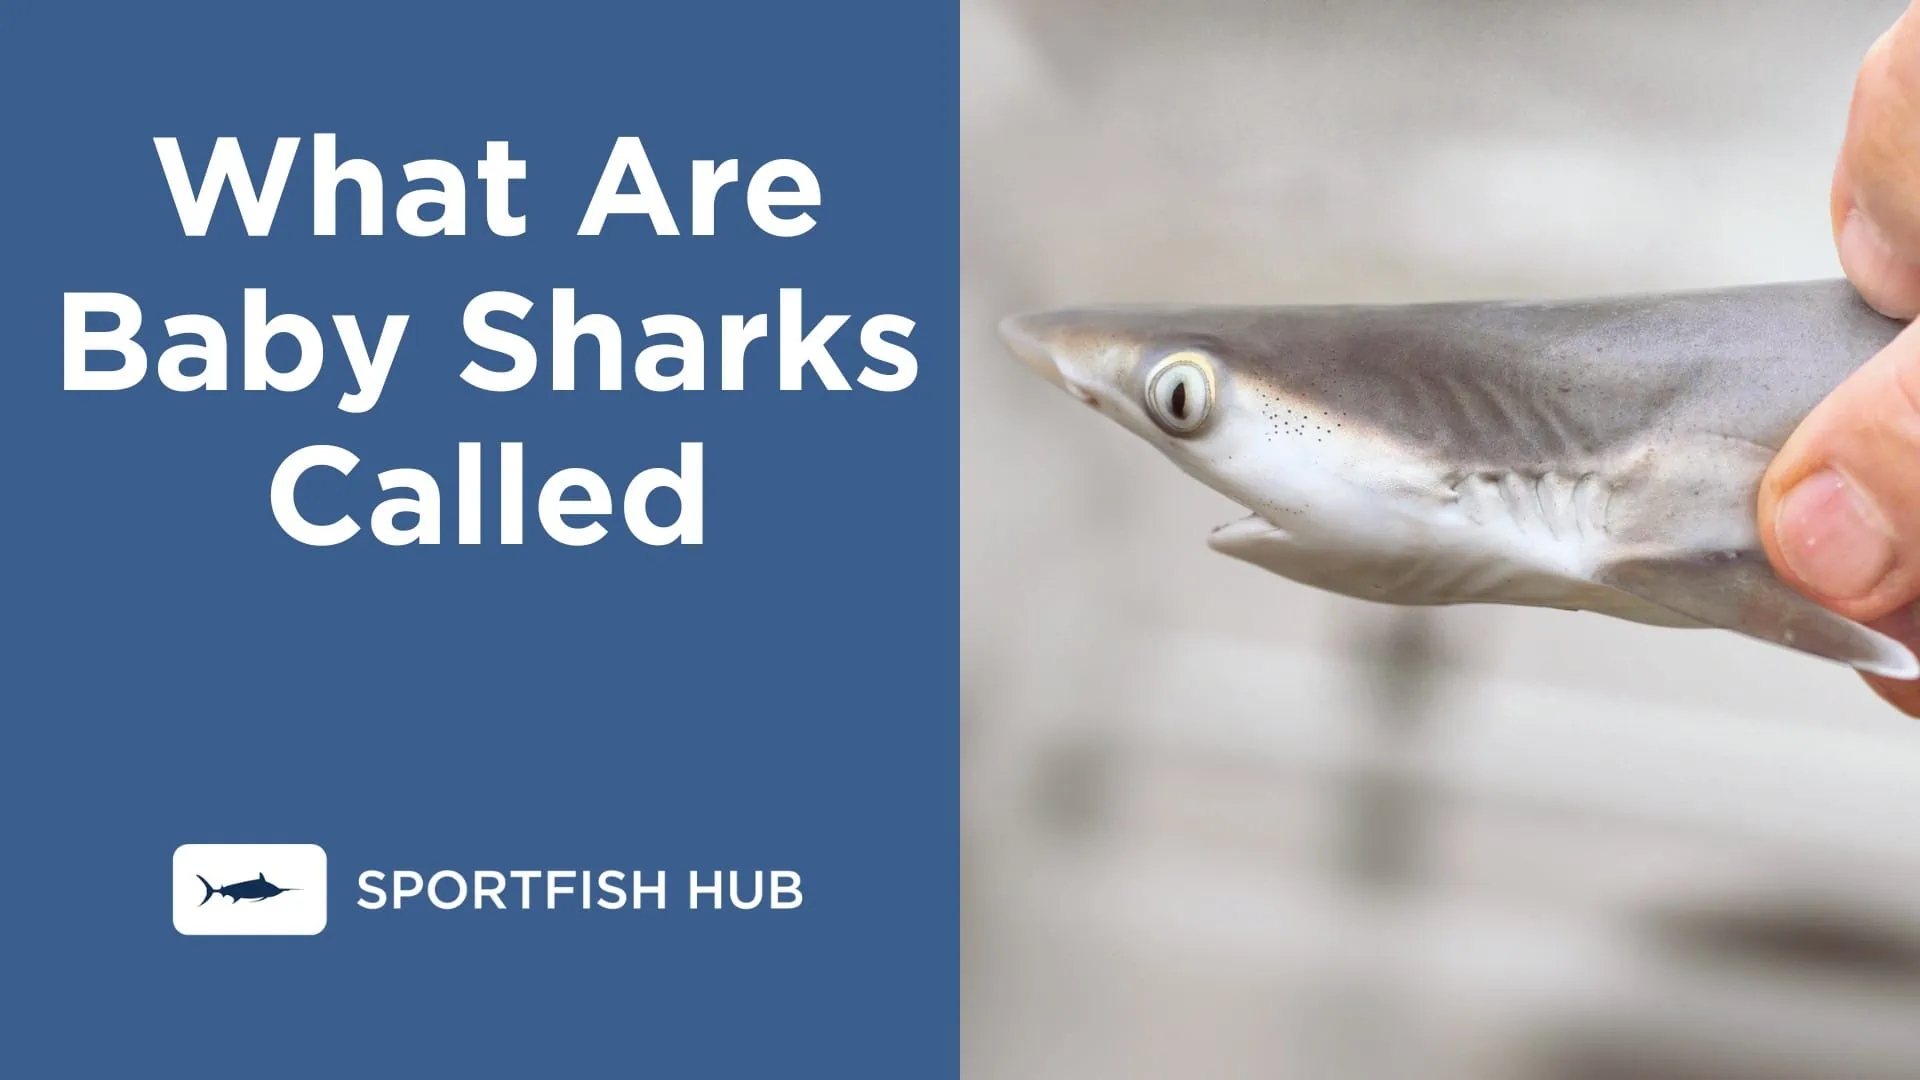 What Are Baby Sharks Called